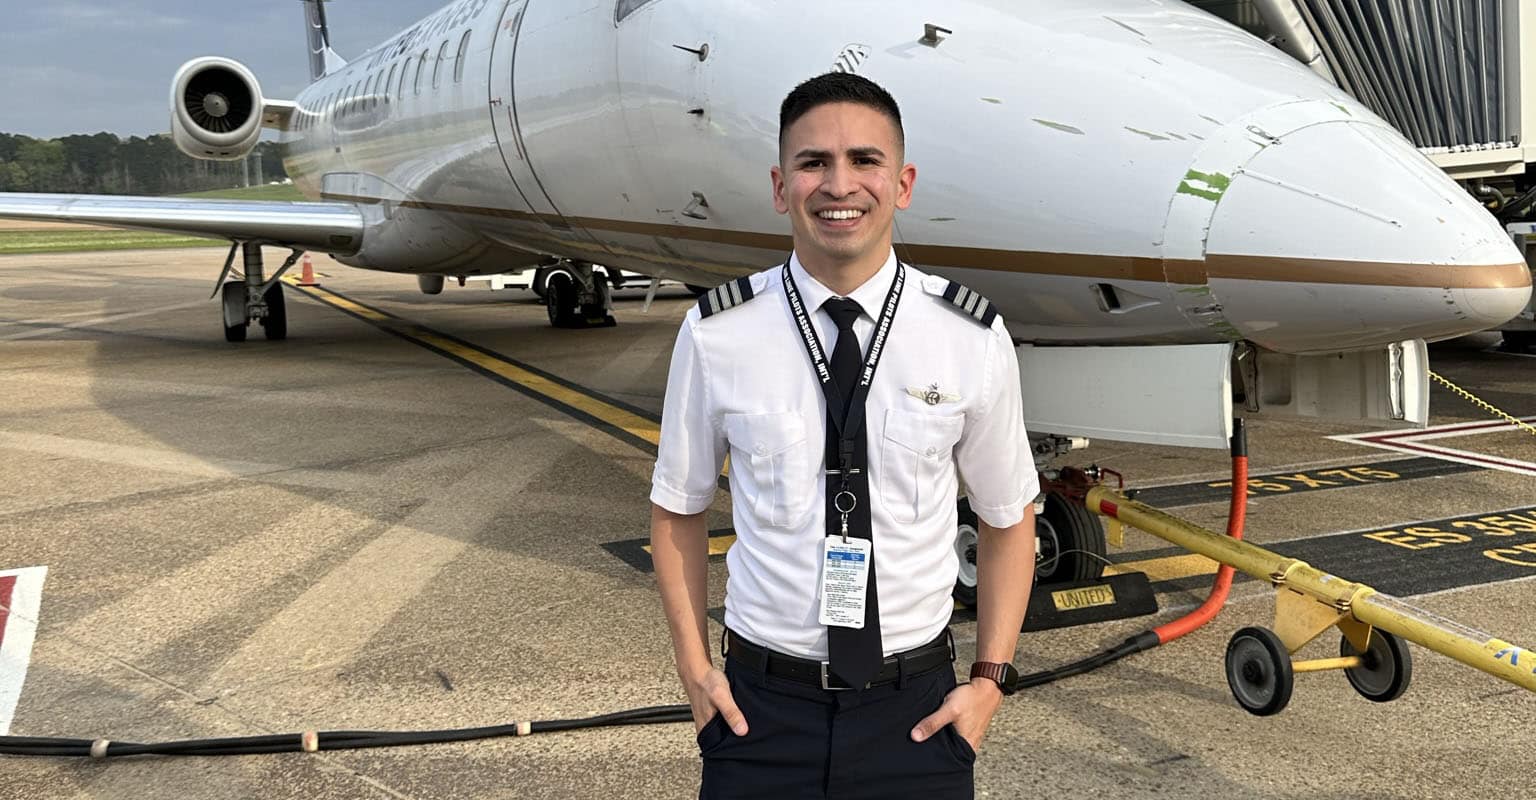 Juan, a man with medium skin tone, wears a pilot uniform and stands in front of a small corporate jet.